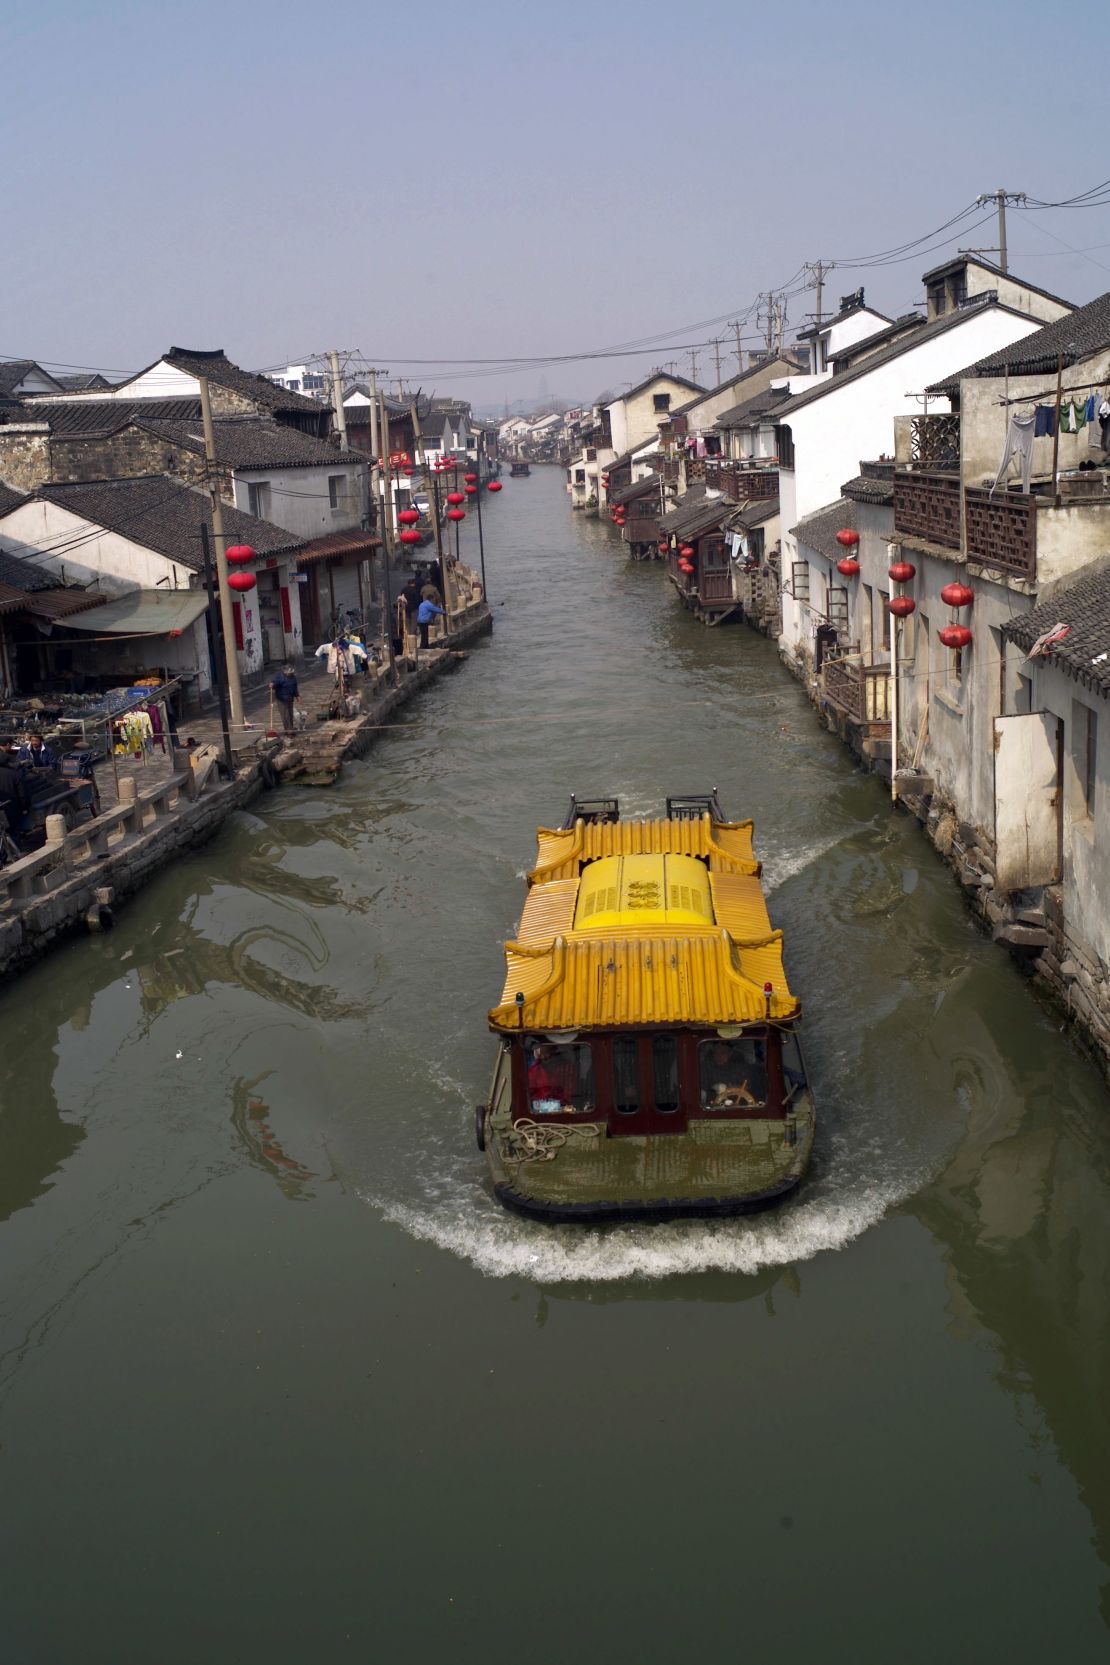 A sightseeing boat sails on a canal in Suzhou.